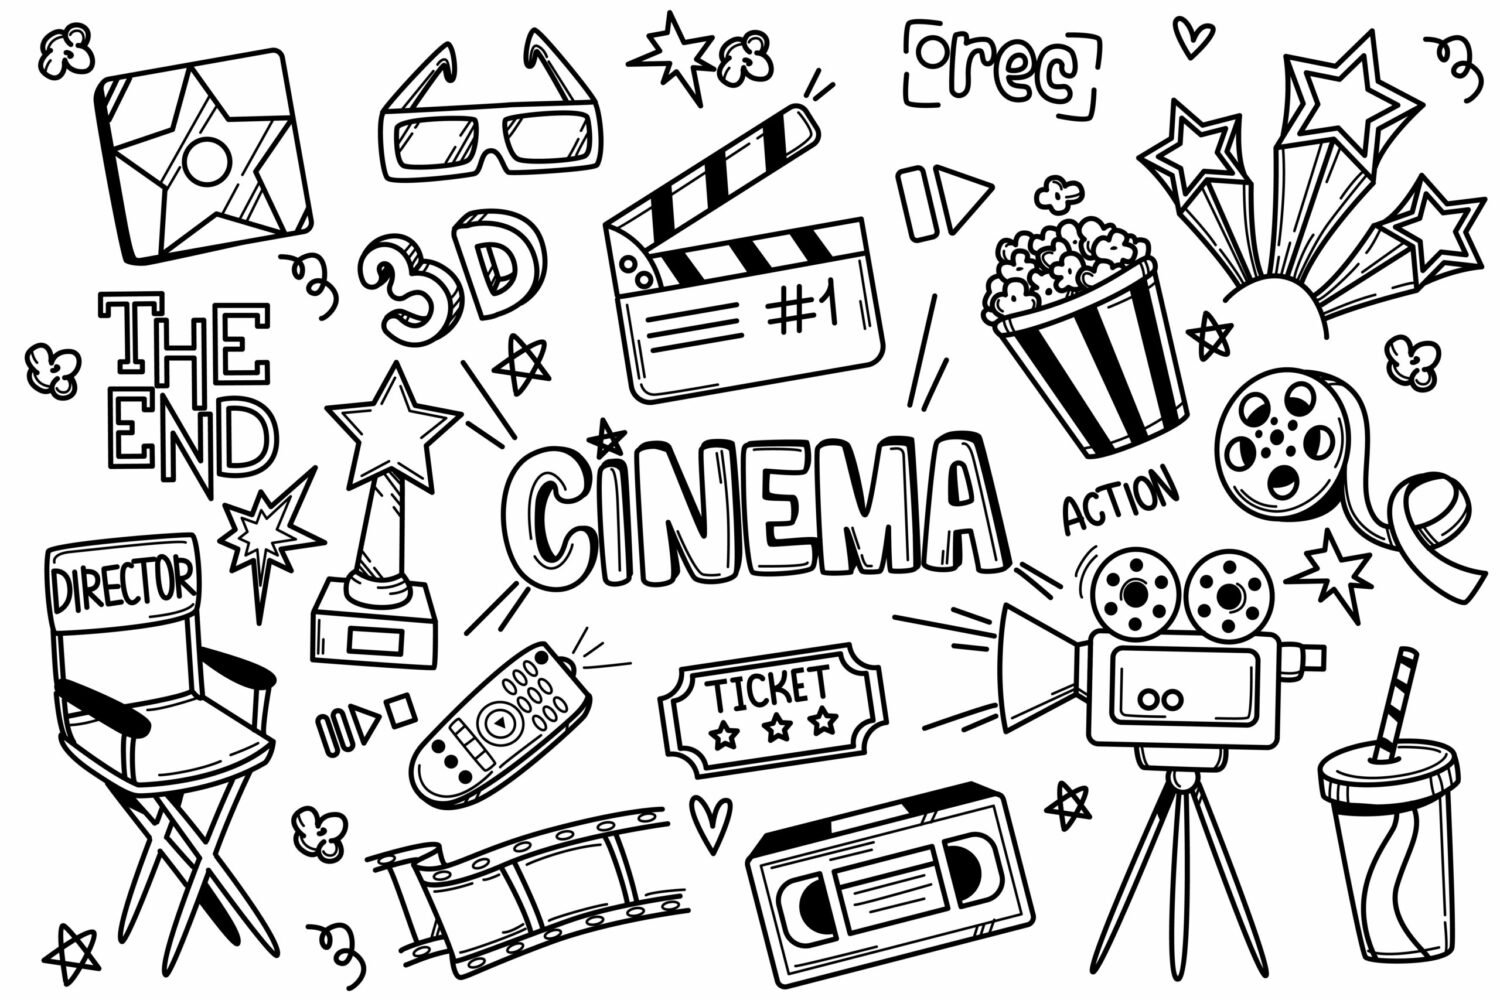 image page your projects vintage cinema accessory sticker cinema ticket action camera director seat